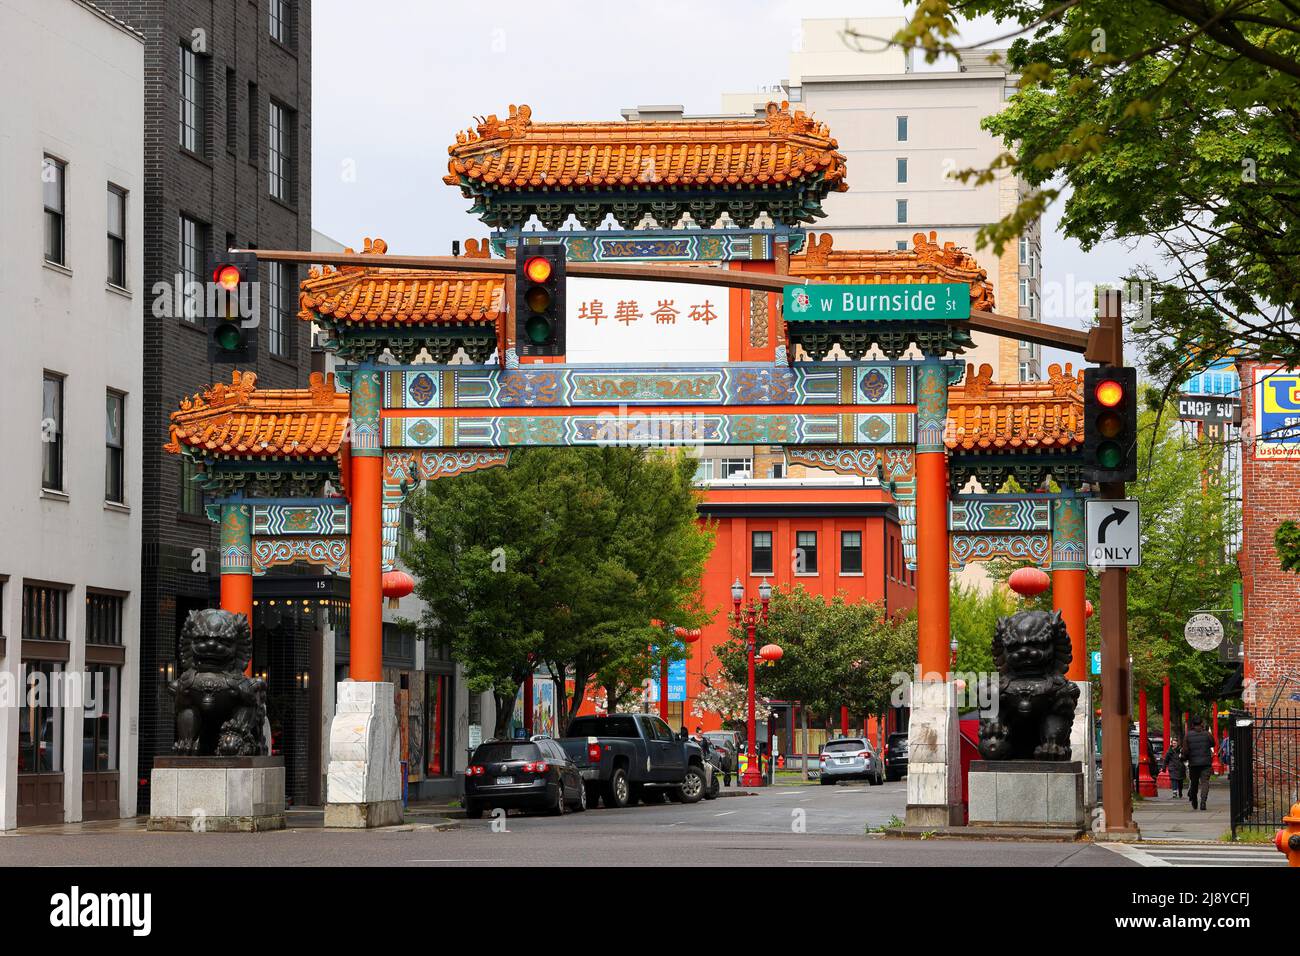 Chinatown Gateway in Old Town Chinatown, SW 4th St and W Burnside St, Portland, Oregon. Stock Photo